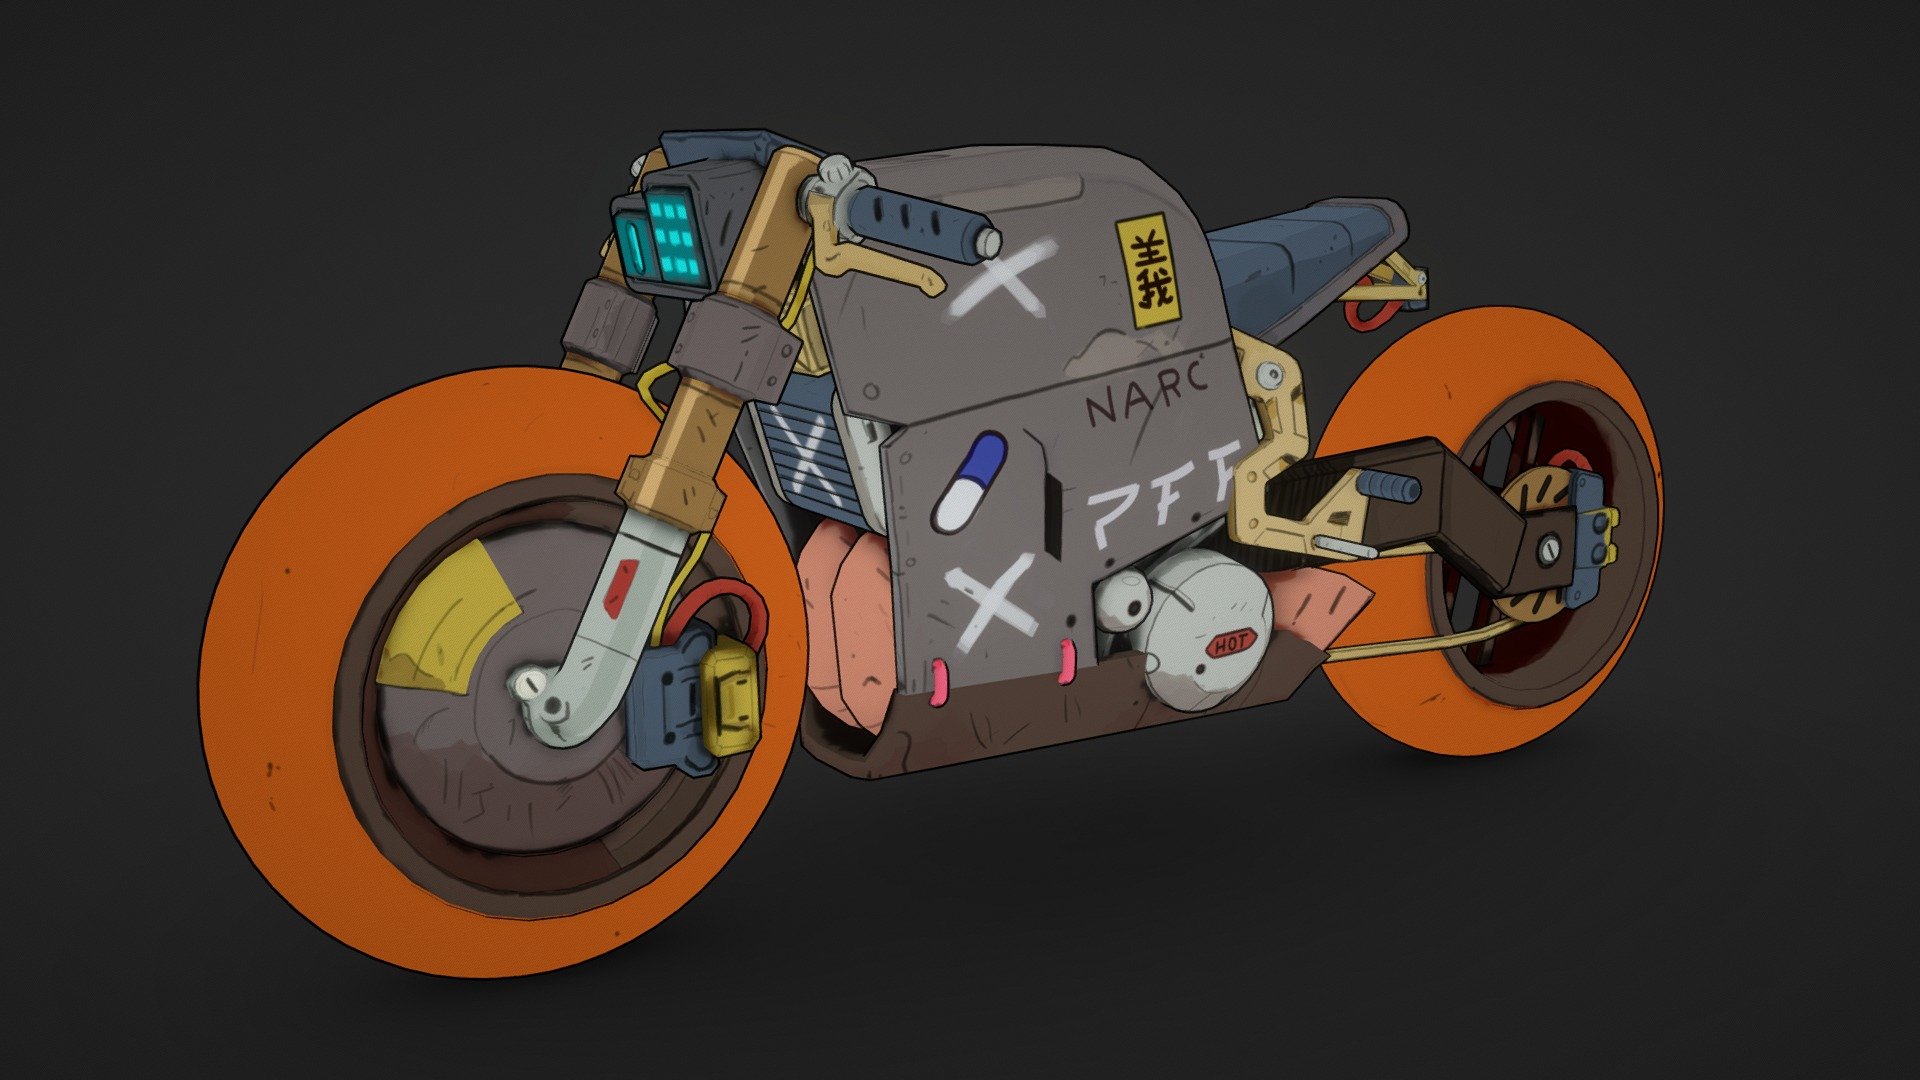 Cyberpunk bike based on the concept of Fernando Correa ( https://www.artstation.com/artwork/8lWYdE ) 

Absolutly fell in love with this bike&hellip; 10/10 would ride it if i had a chance&hellip;until then&hellip;lets just model it and maybe....just maybe create some NEO TOYKO BIKE GANG simulator

full project on https://www.artstation.com/artwork/3oLwXg - Cyberpunk bike - Download Free 3D model by daCruz 3d model